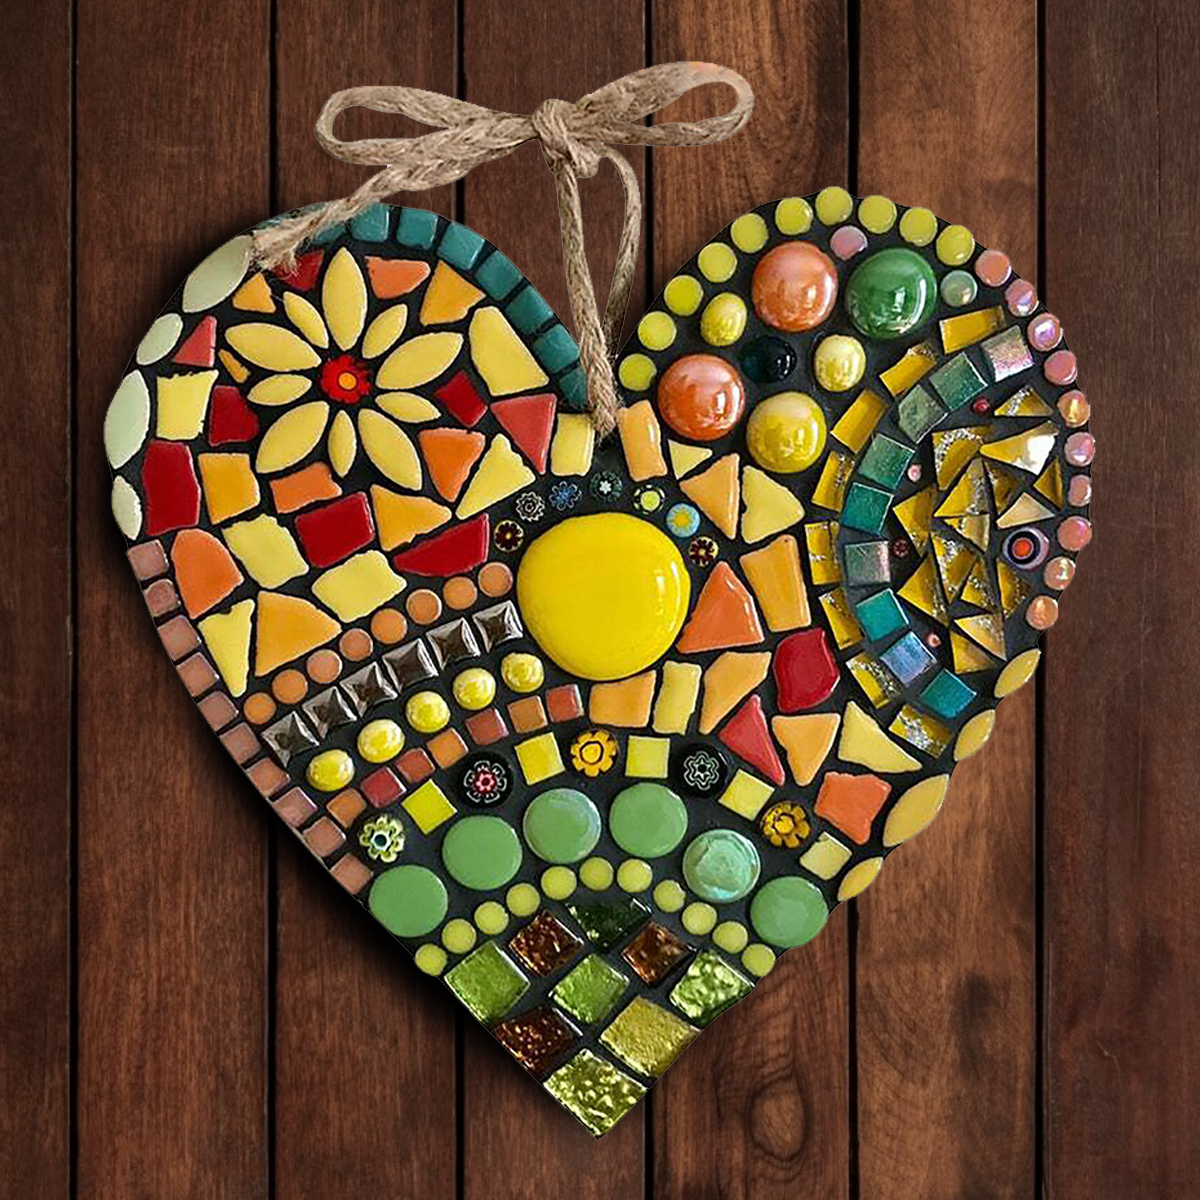 (🎄CHRISTMAS EARLY SALE-48% OFF) Large garden mosaic heart🔥Buy 2 Get Free shipping